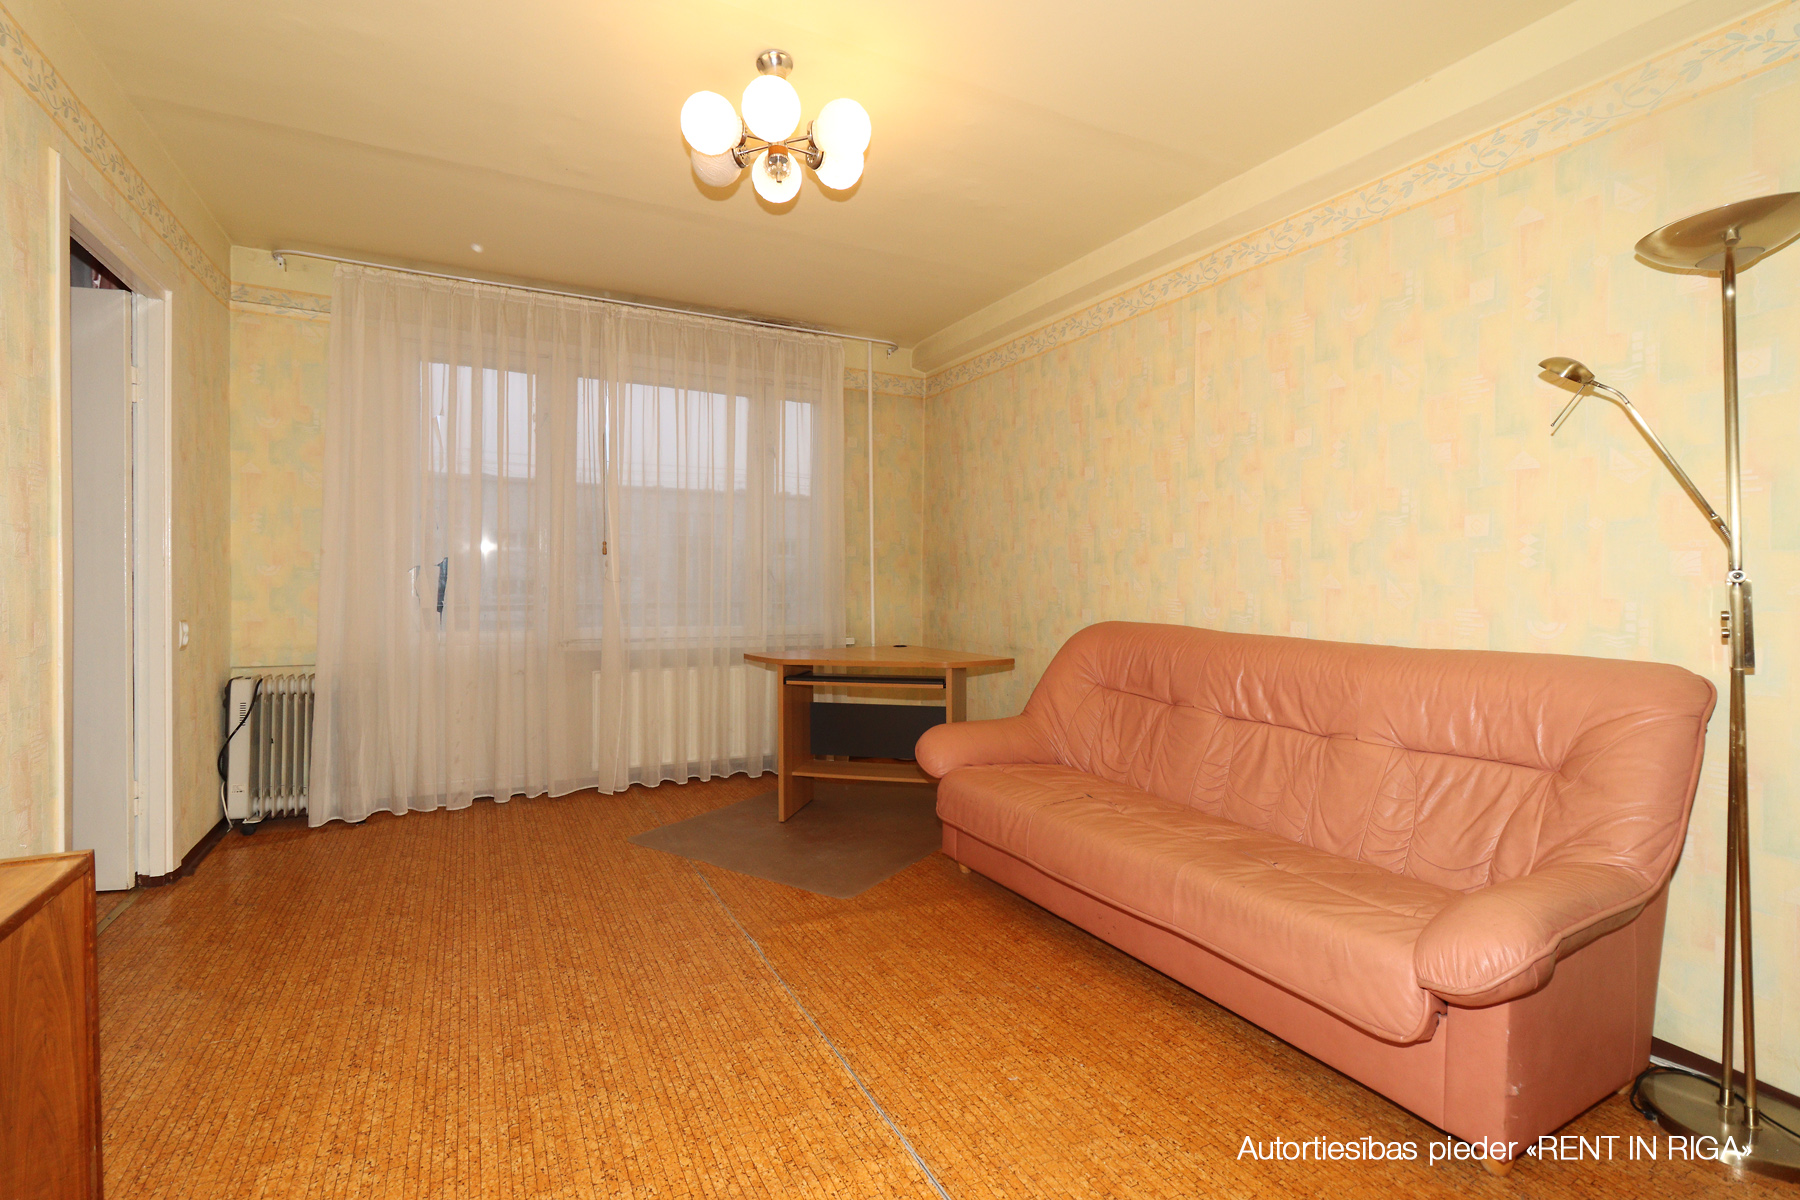 Apartment for rent, Nīcgales street 8 - Image 1